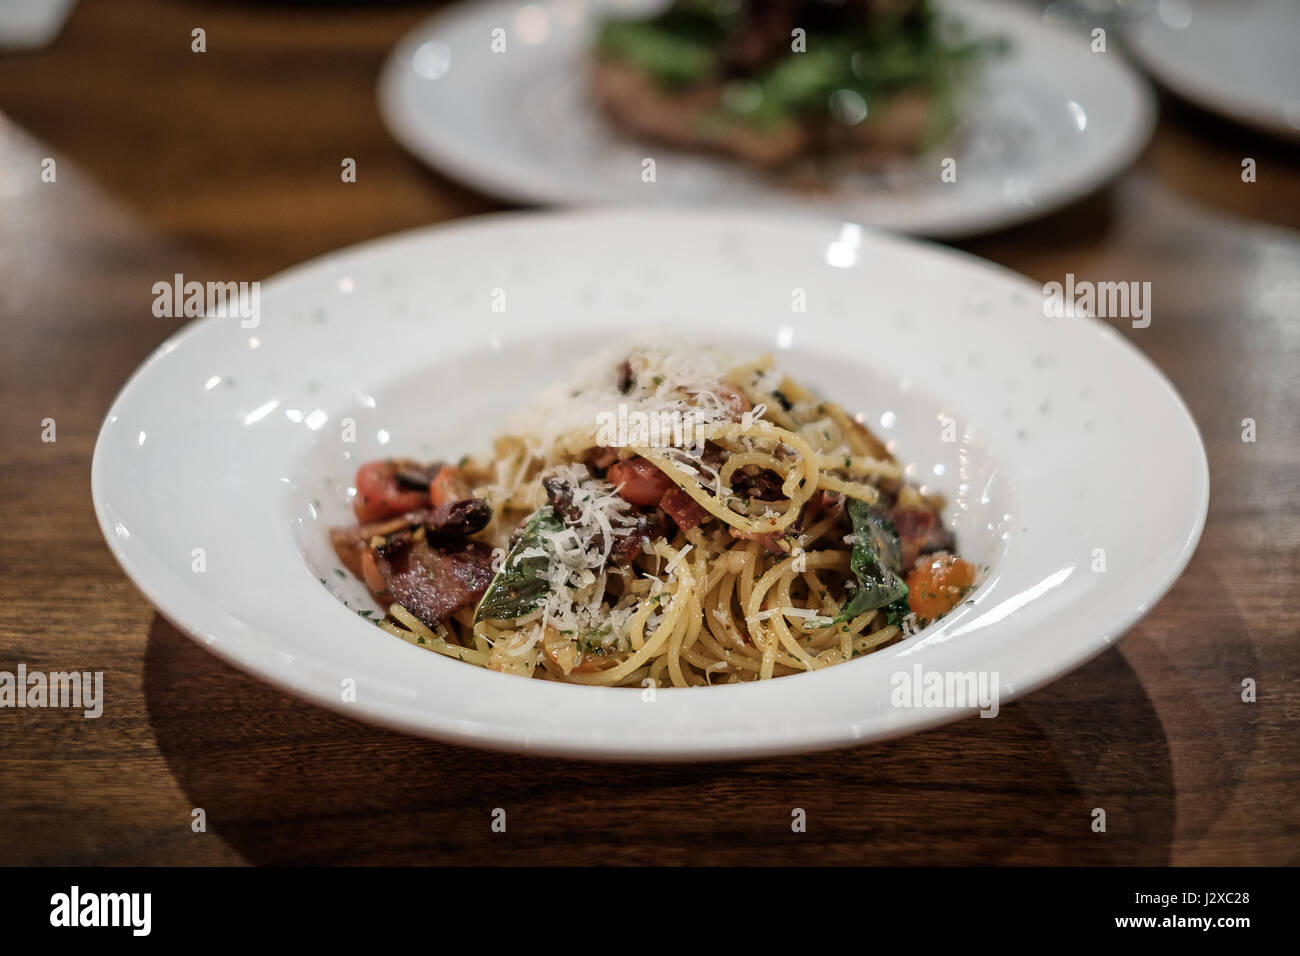 Spaghetti with olive oil, dry chili, and bacon, traditional Italian style. Stock Photo